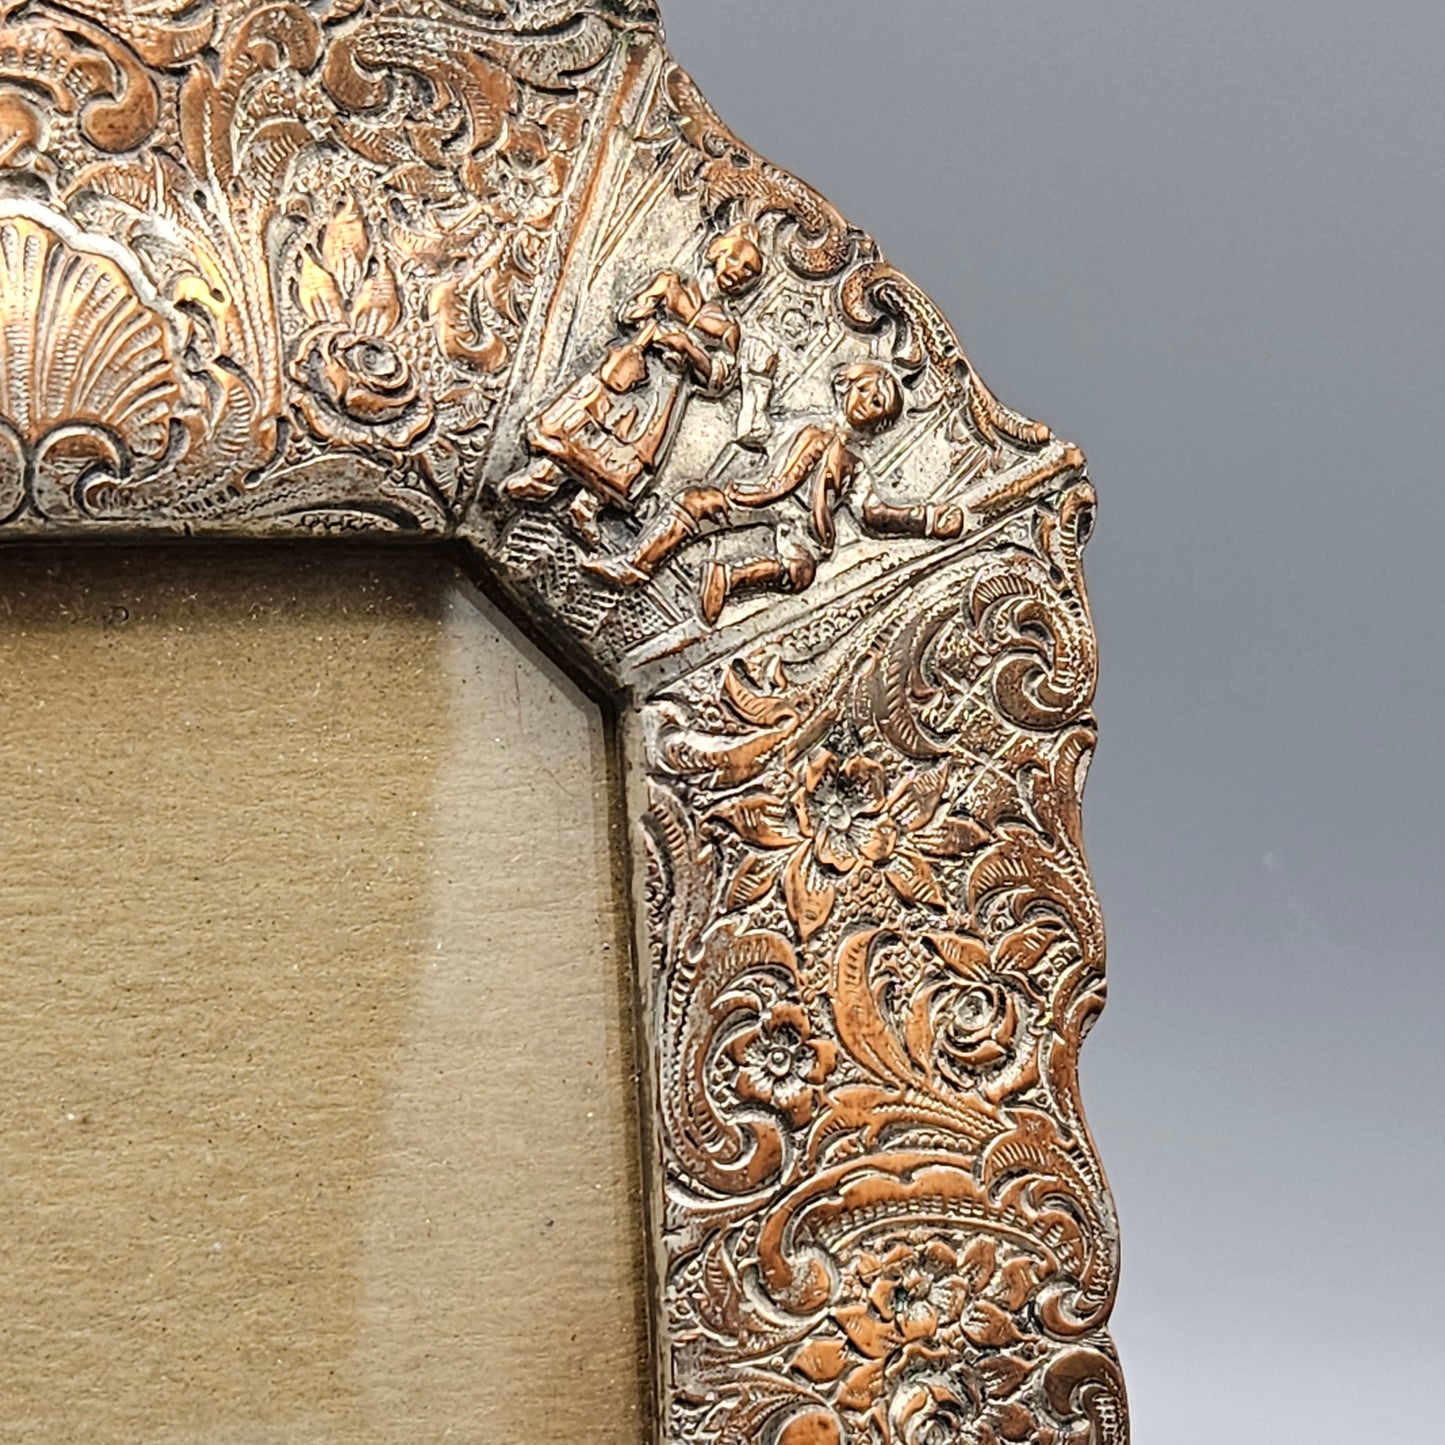 Antique Hallmarked Repousse Frame